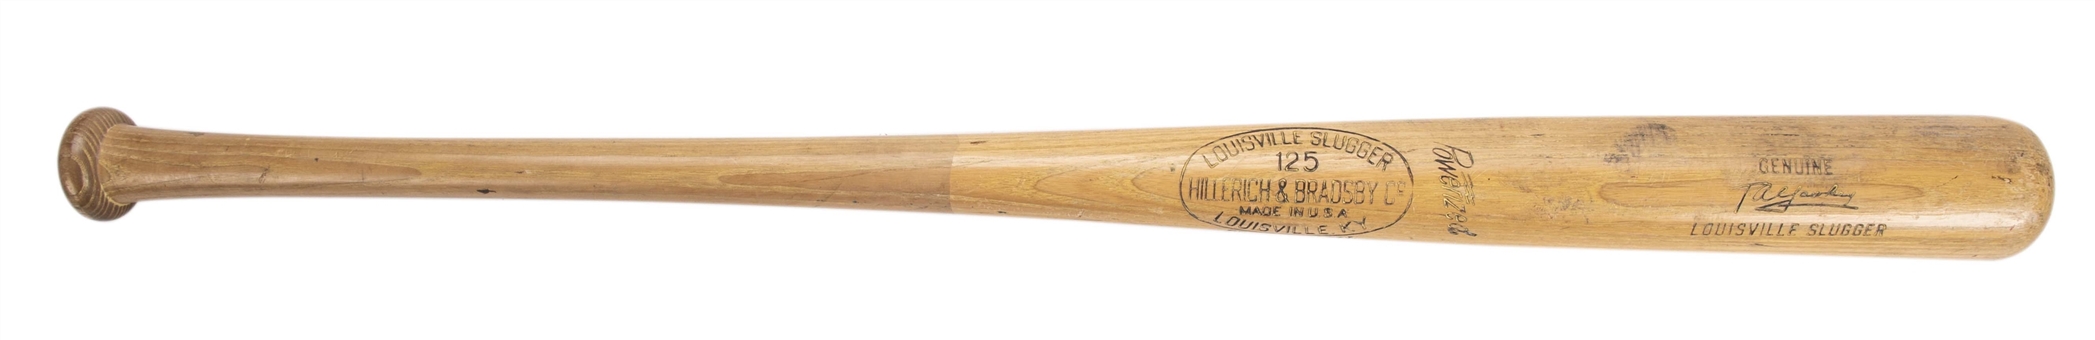 Circa 1955 Tom Yawkey Game Used Hillerich & Bradsby W183 Model Bat Used For Batting Practice (PSA/DNA)